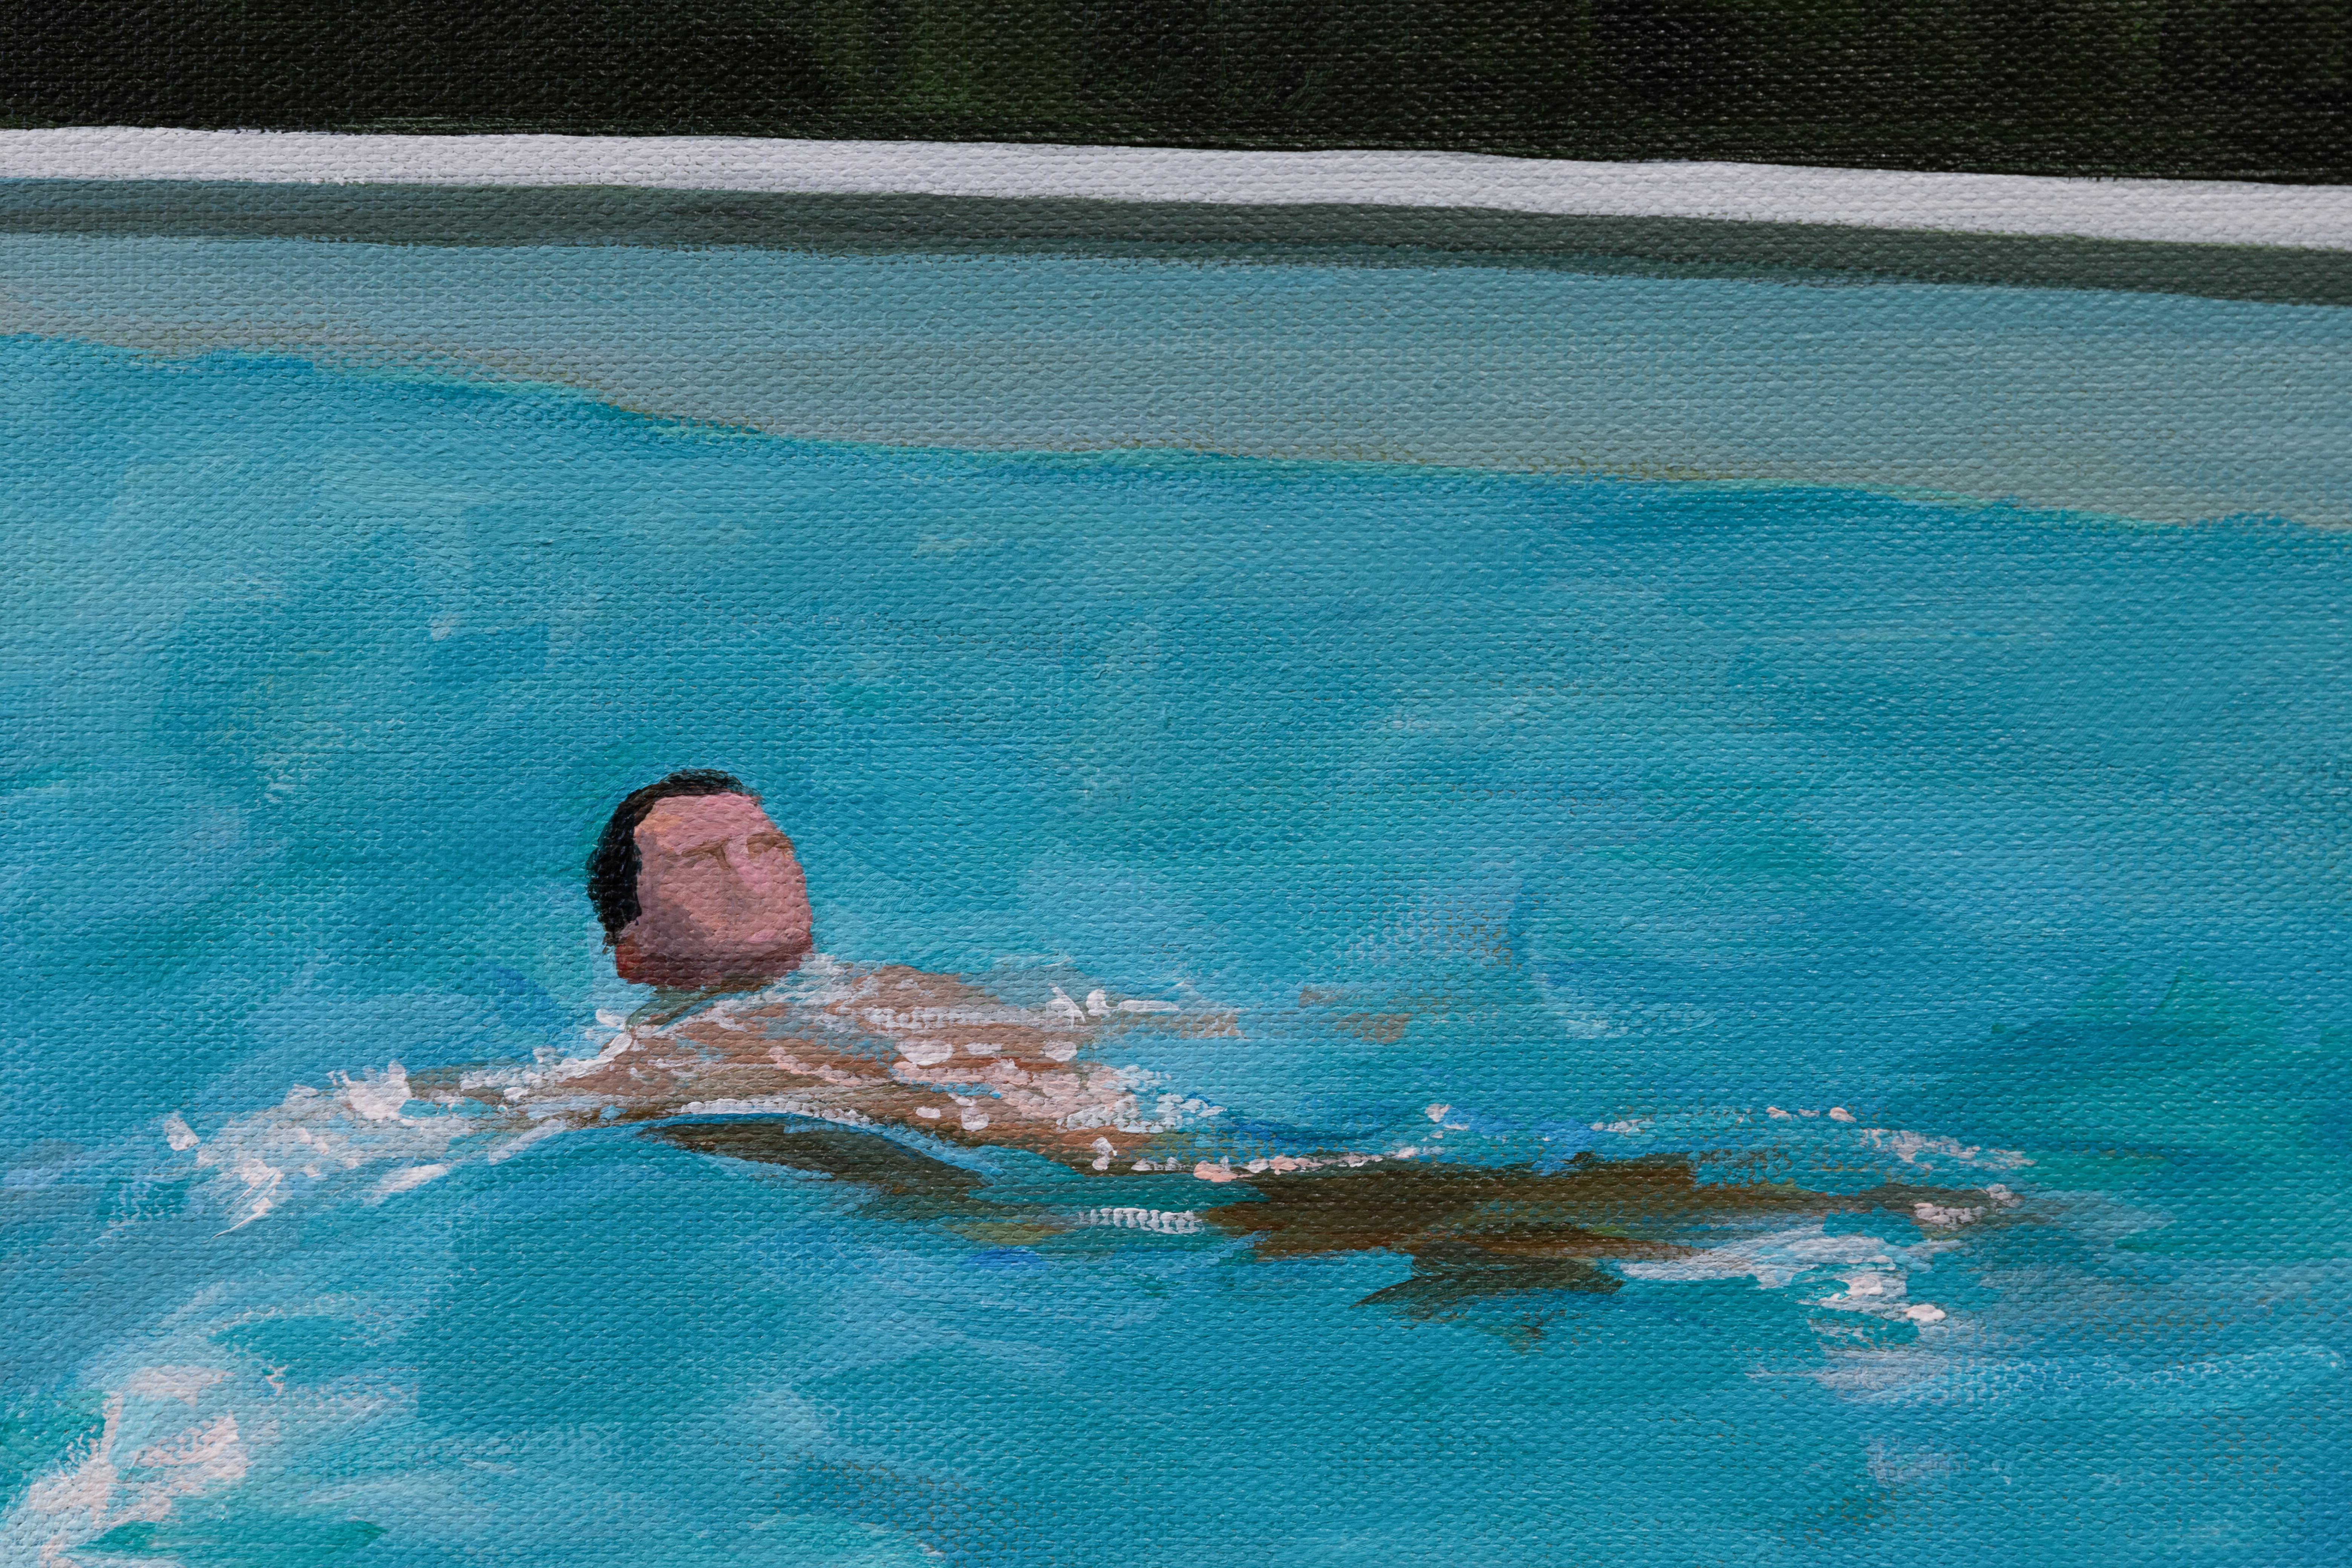 “Single Swimmer No. 2”- acrylic on canvas - Painting by Kory Alexander